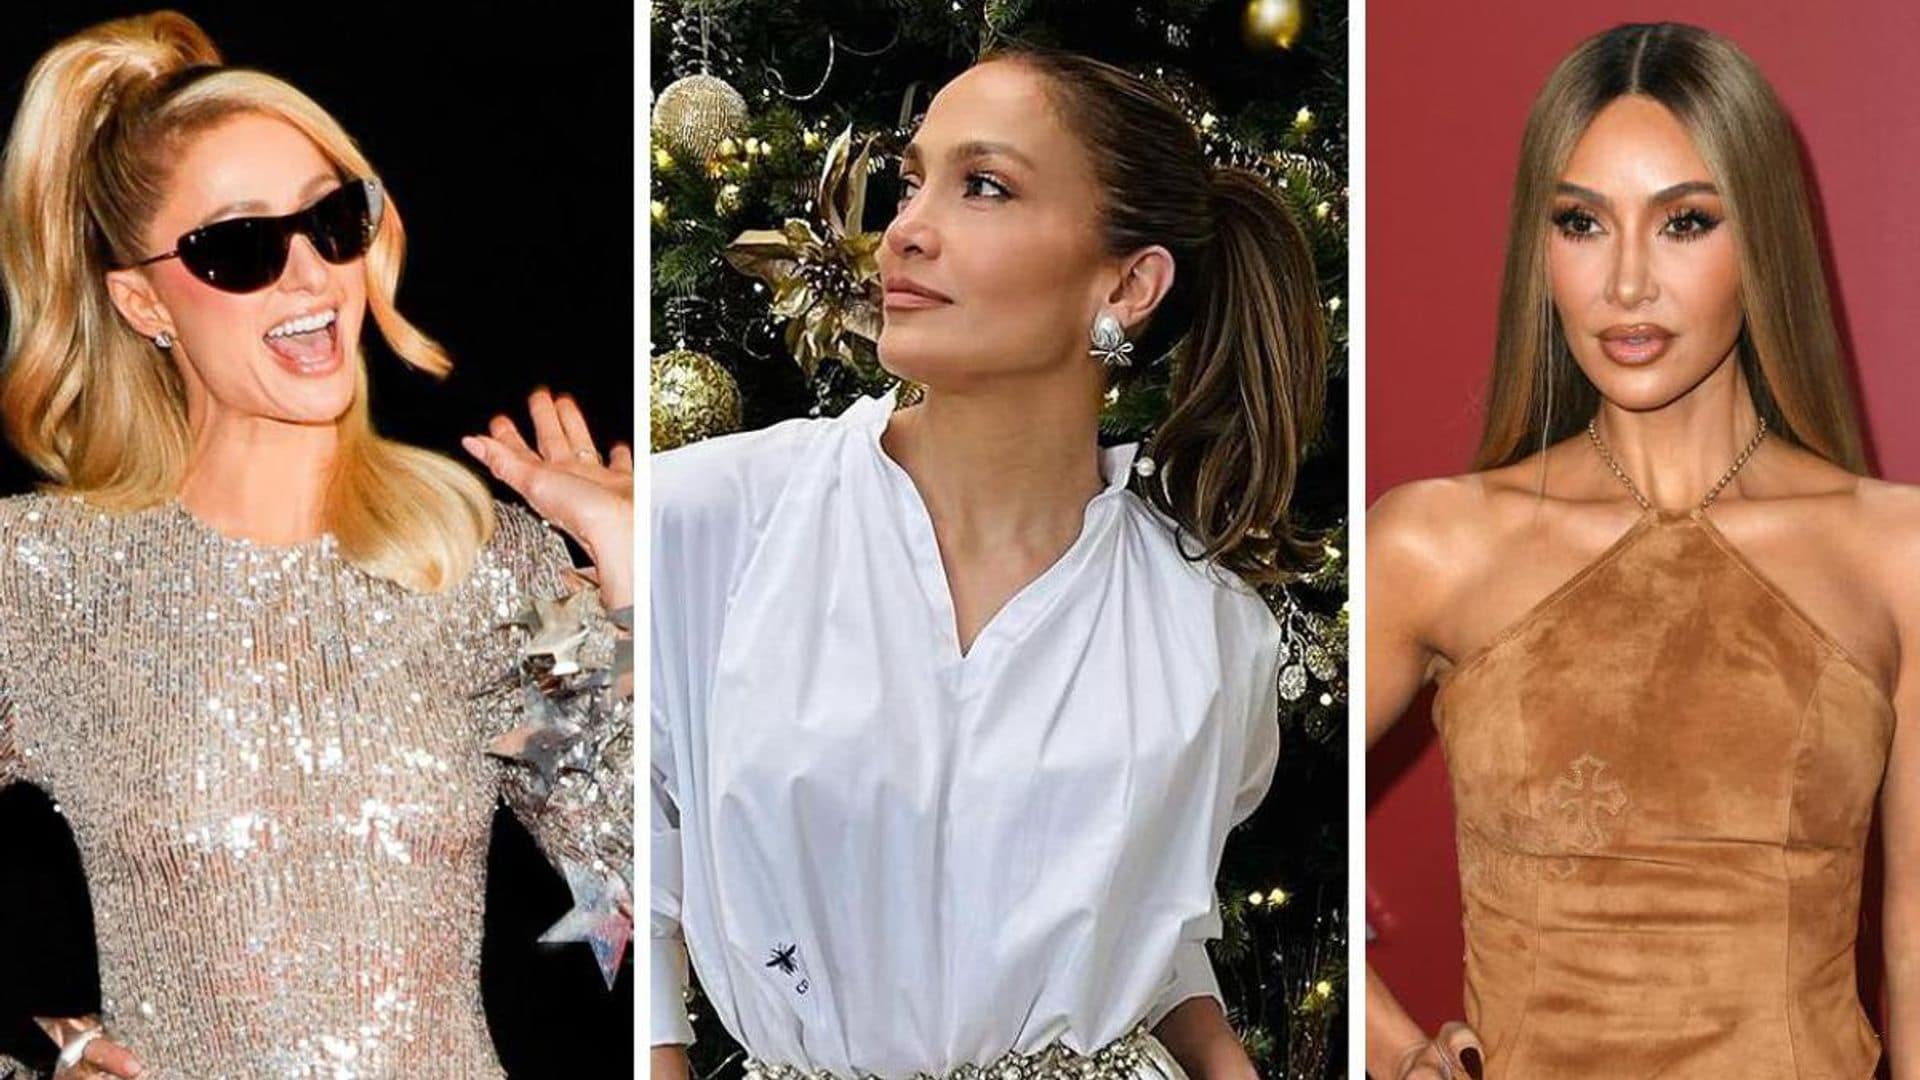 Deck the hall! Celebrities getting into the Christmas spirit